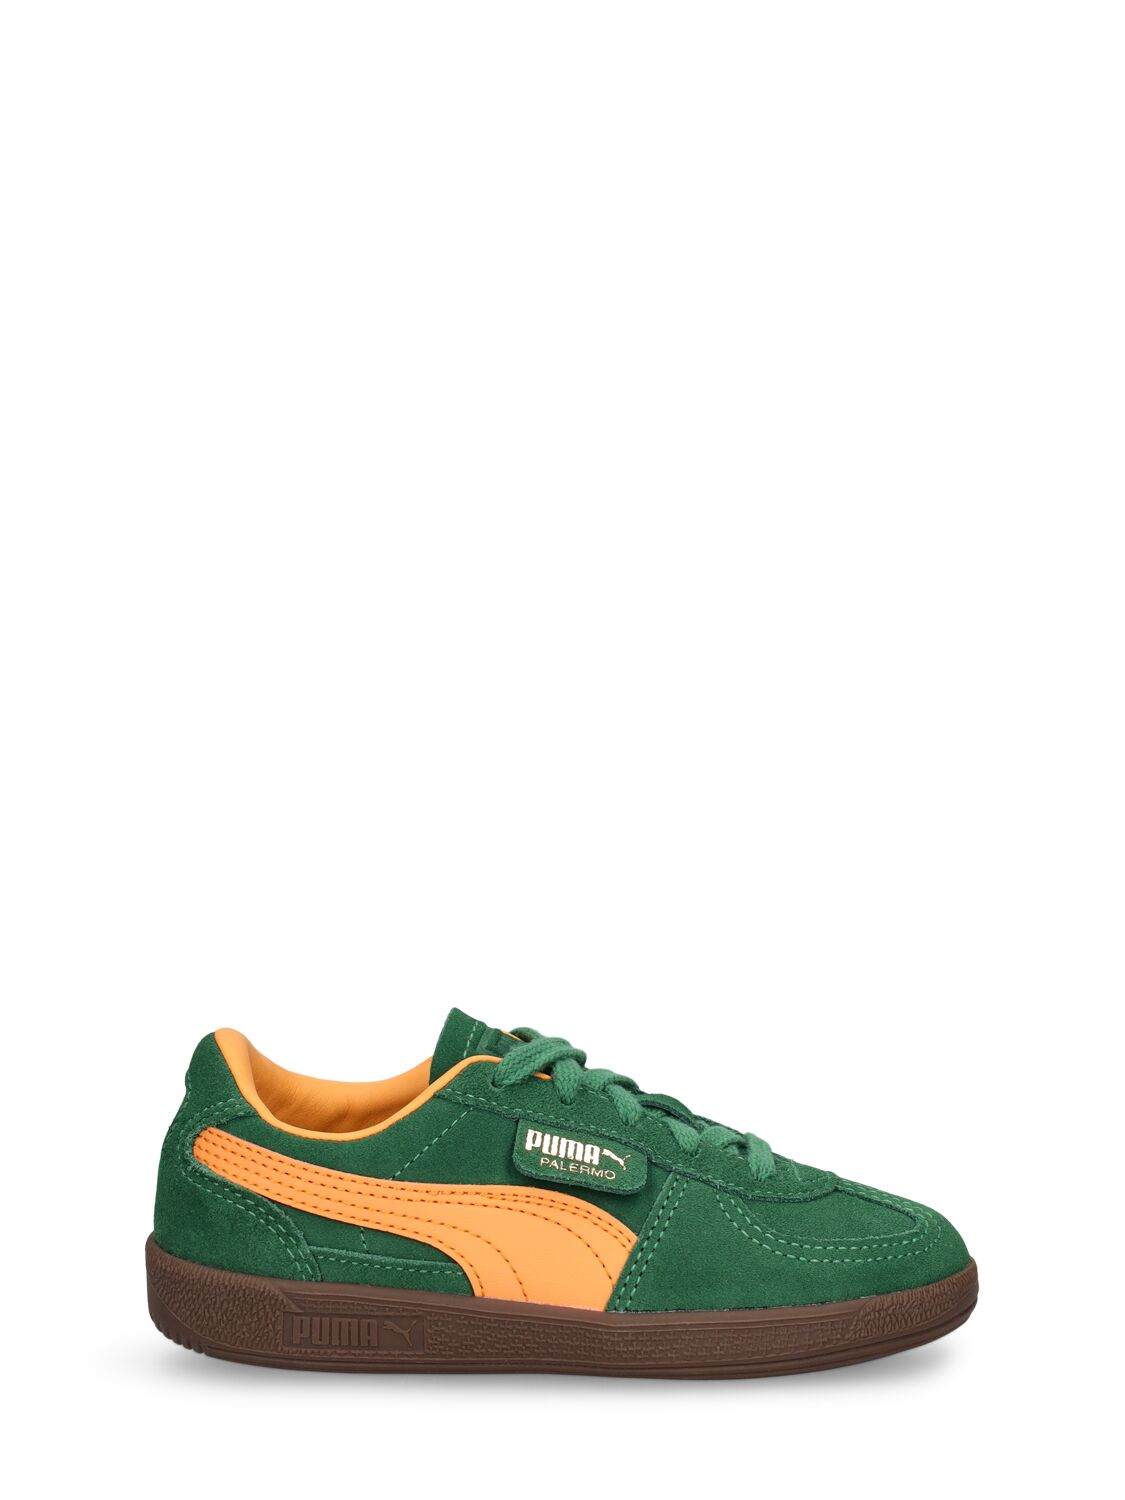 Puma Kids' Palermo Ps Lace-up Sneakers In Green